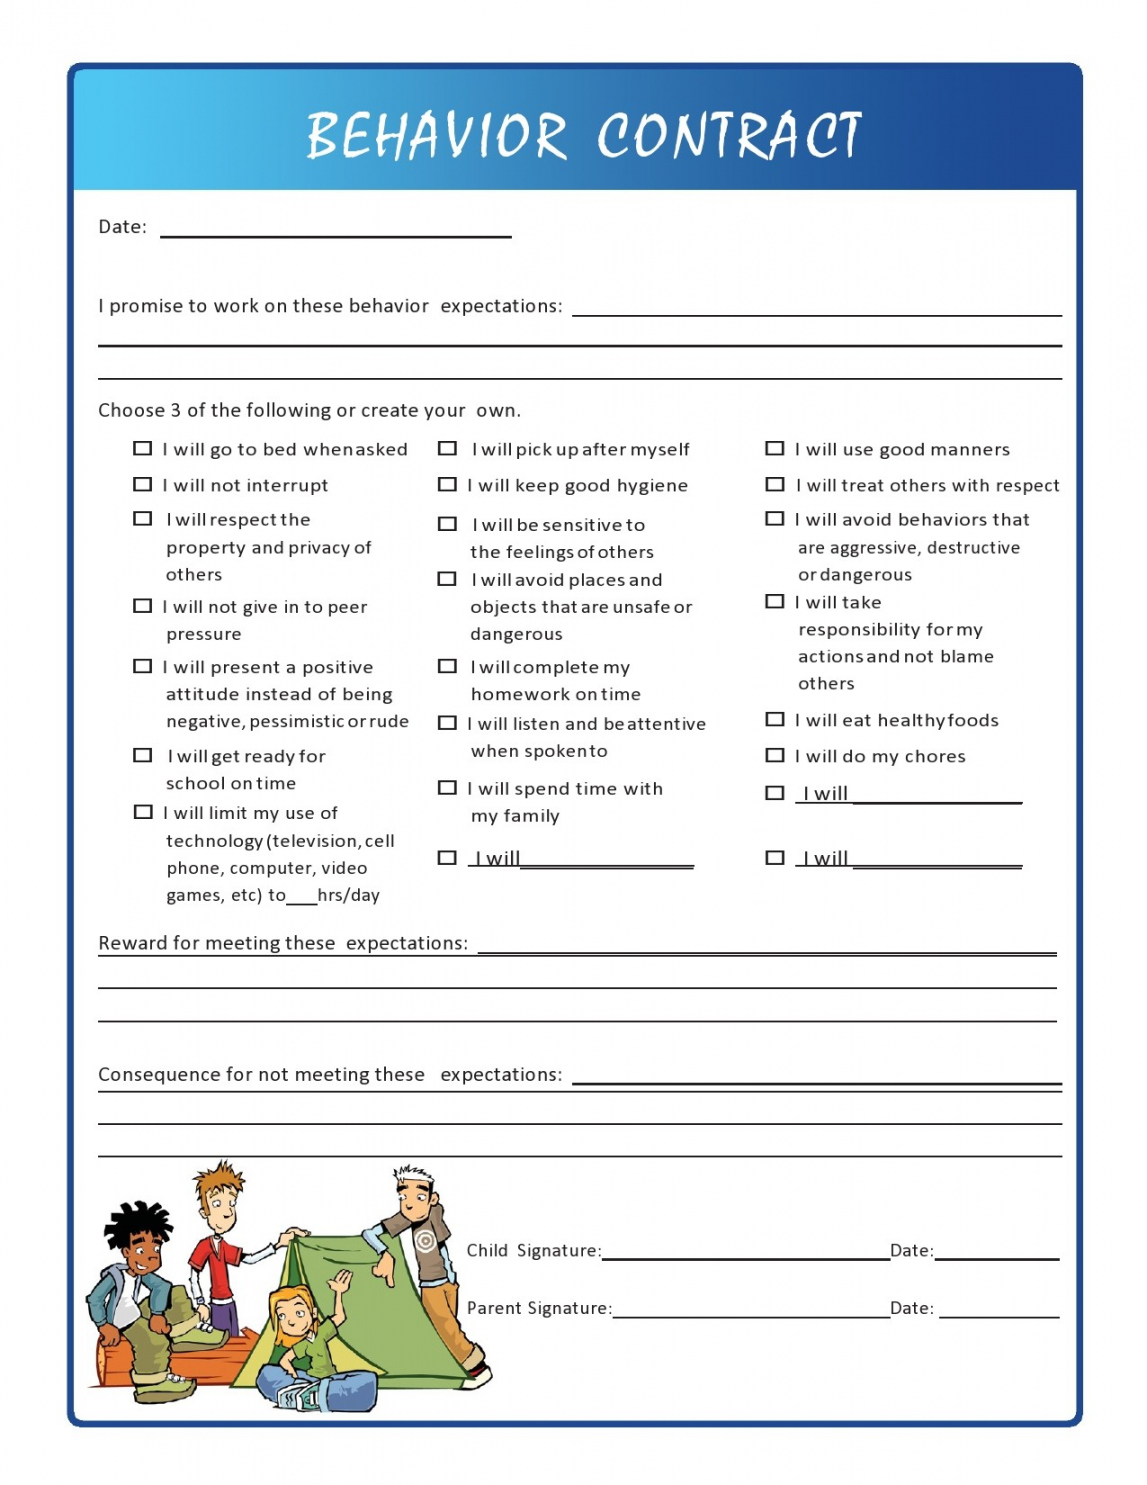 Effective Behavior Contract Templates (+Examples) ᐅ TemplateLab - FREE Printables - Free Printable Behavior Contracts & Charts